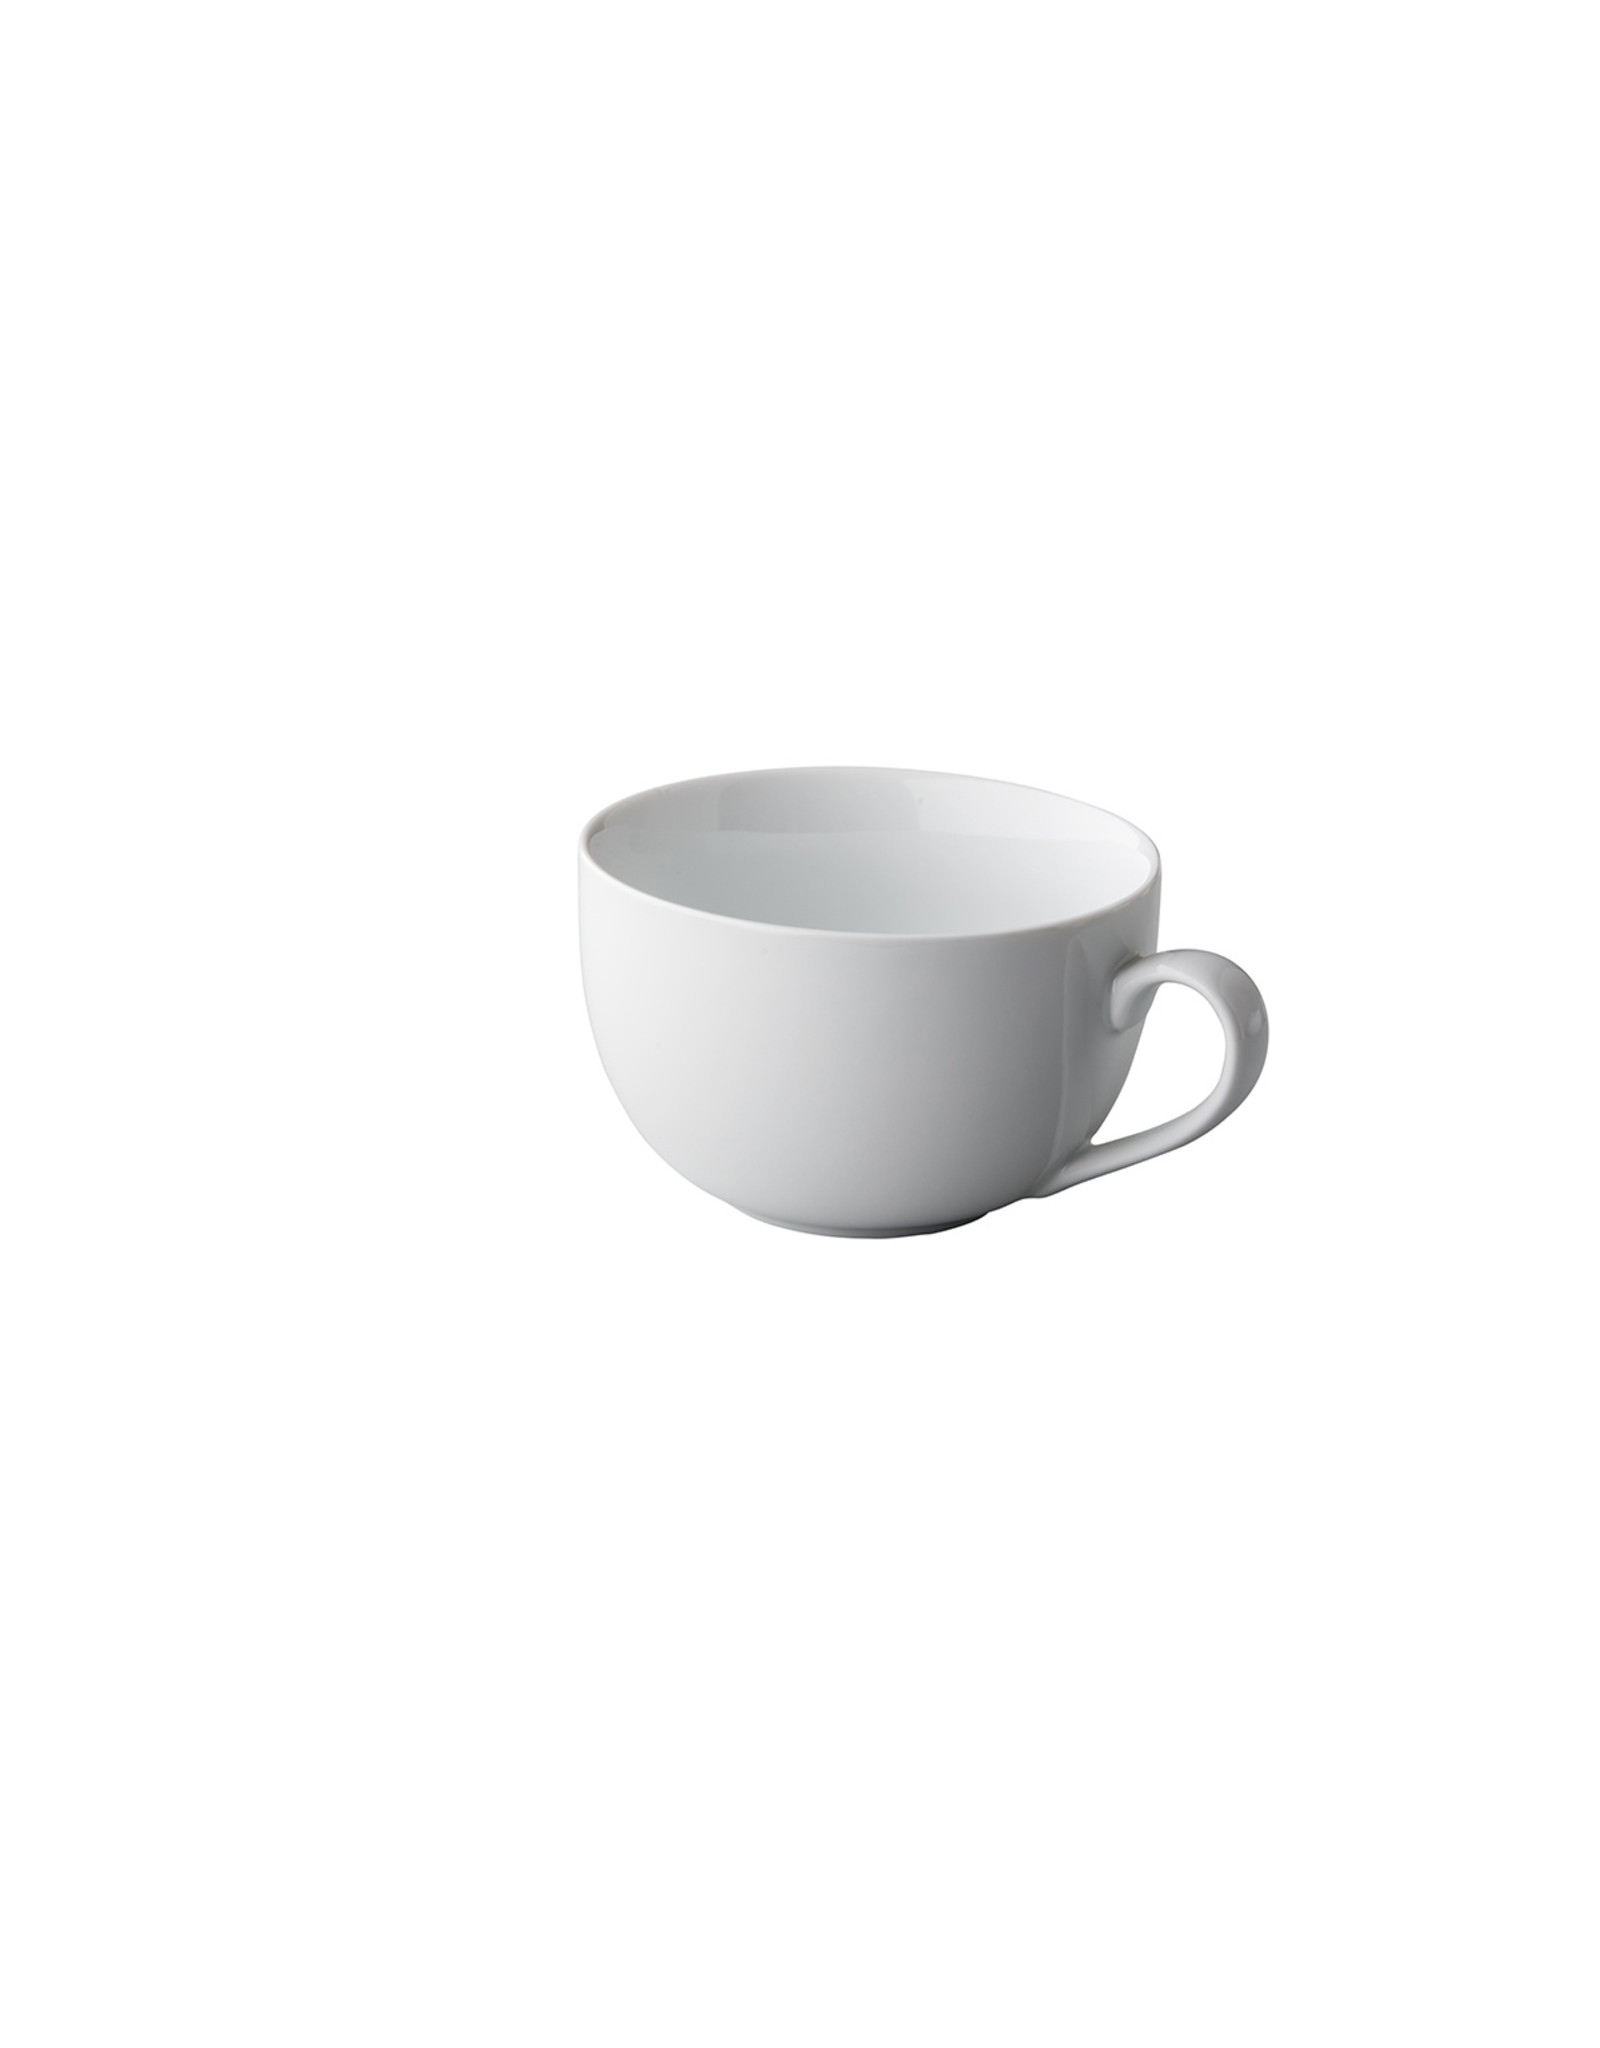 Stylepoint Q Basic Non stackable mug 400ml